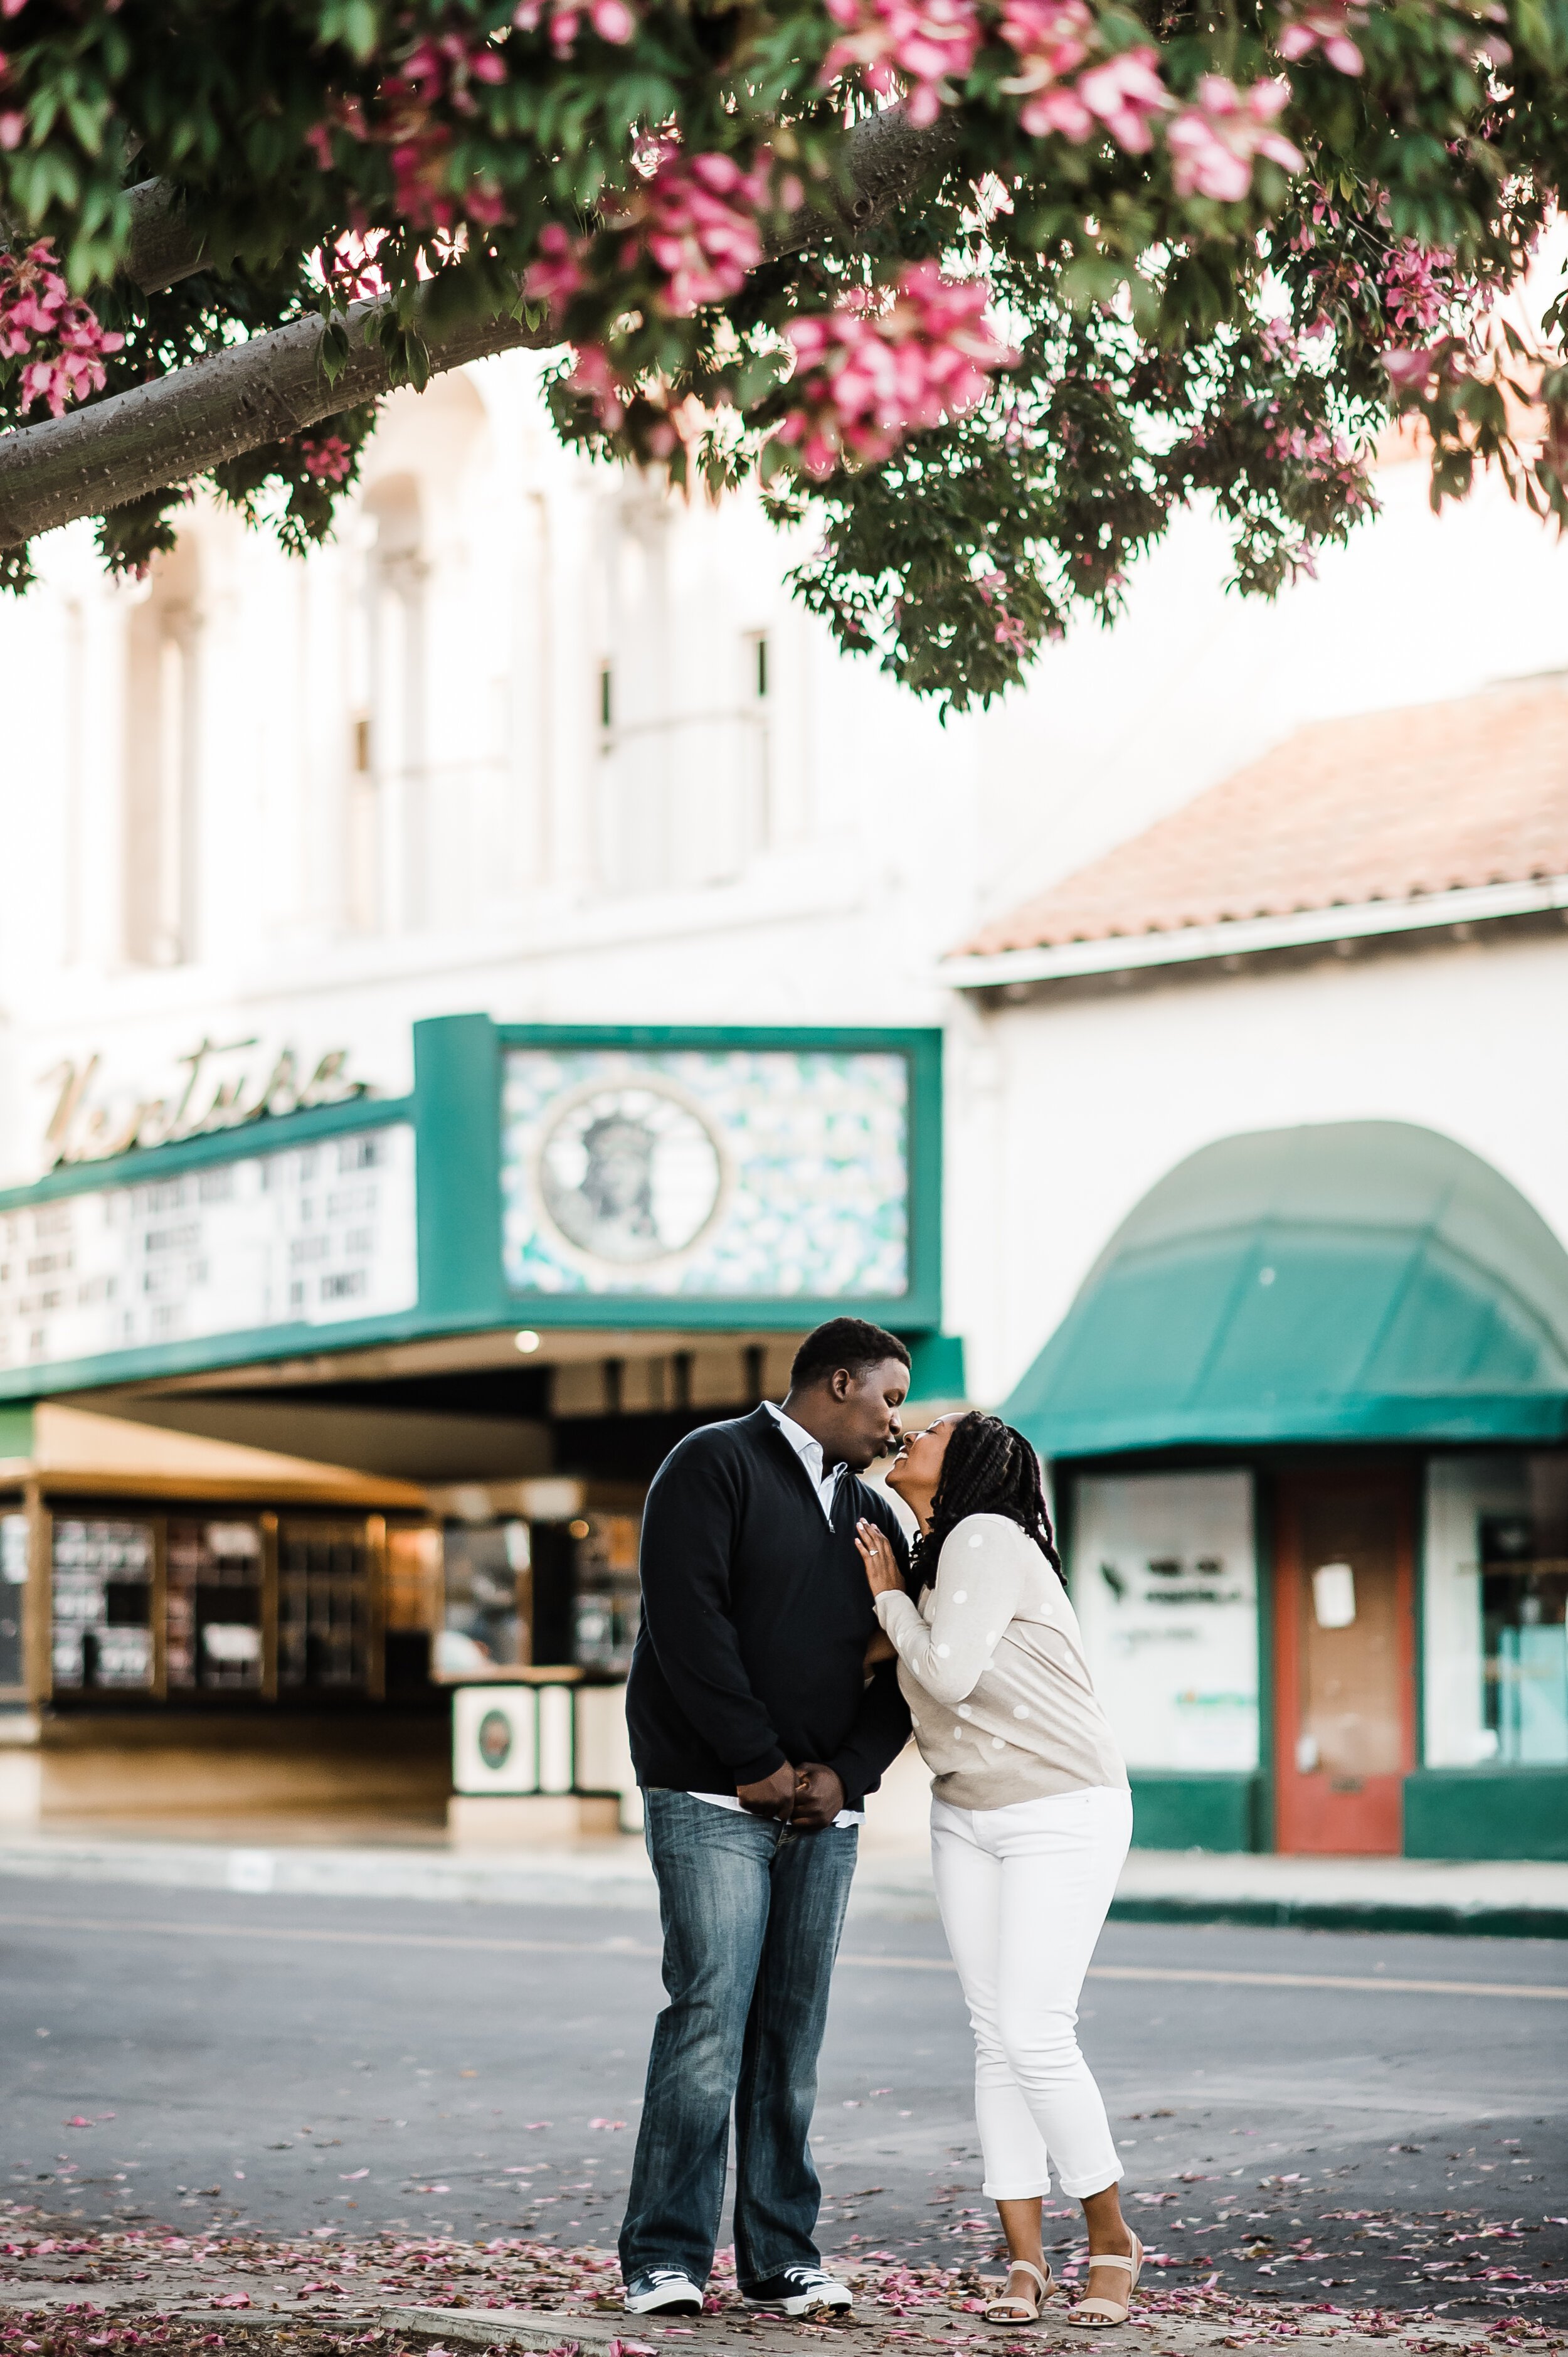 www.santabarbarawedding.com | Michelle Ramirez Photography | Couple in Front of Old Theater at Engagement Shoot in Downtown Ventura